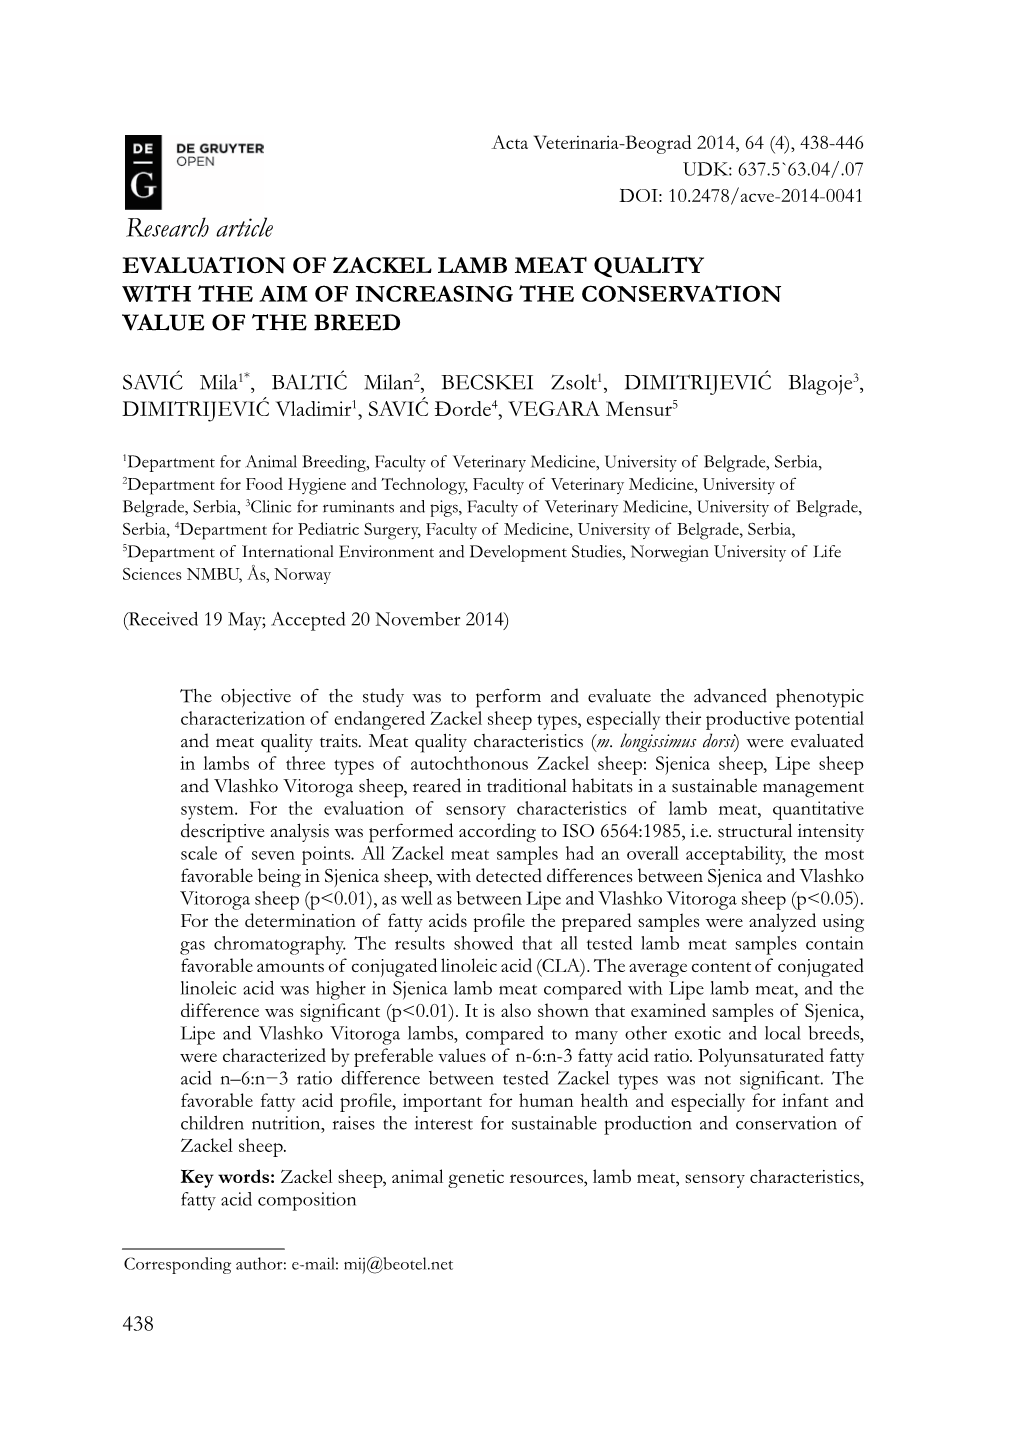 Research Article EVALUATION of ZACKEL LAMB MEAT QUALITY with the AIM of INCREASING the CONSERVATION VALUE of the BREED